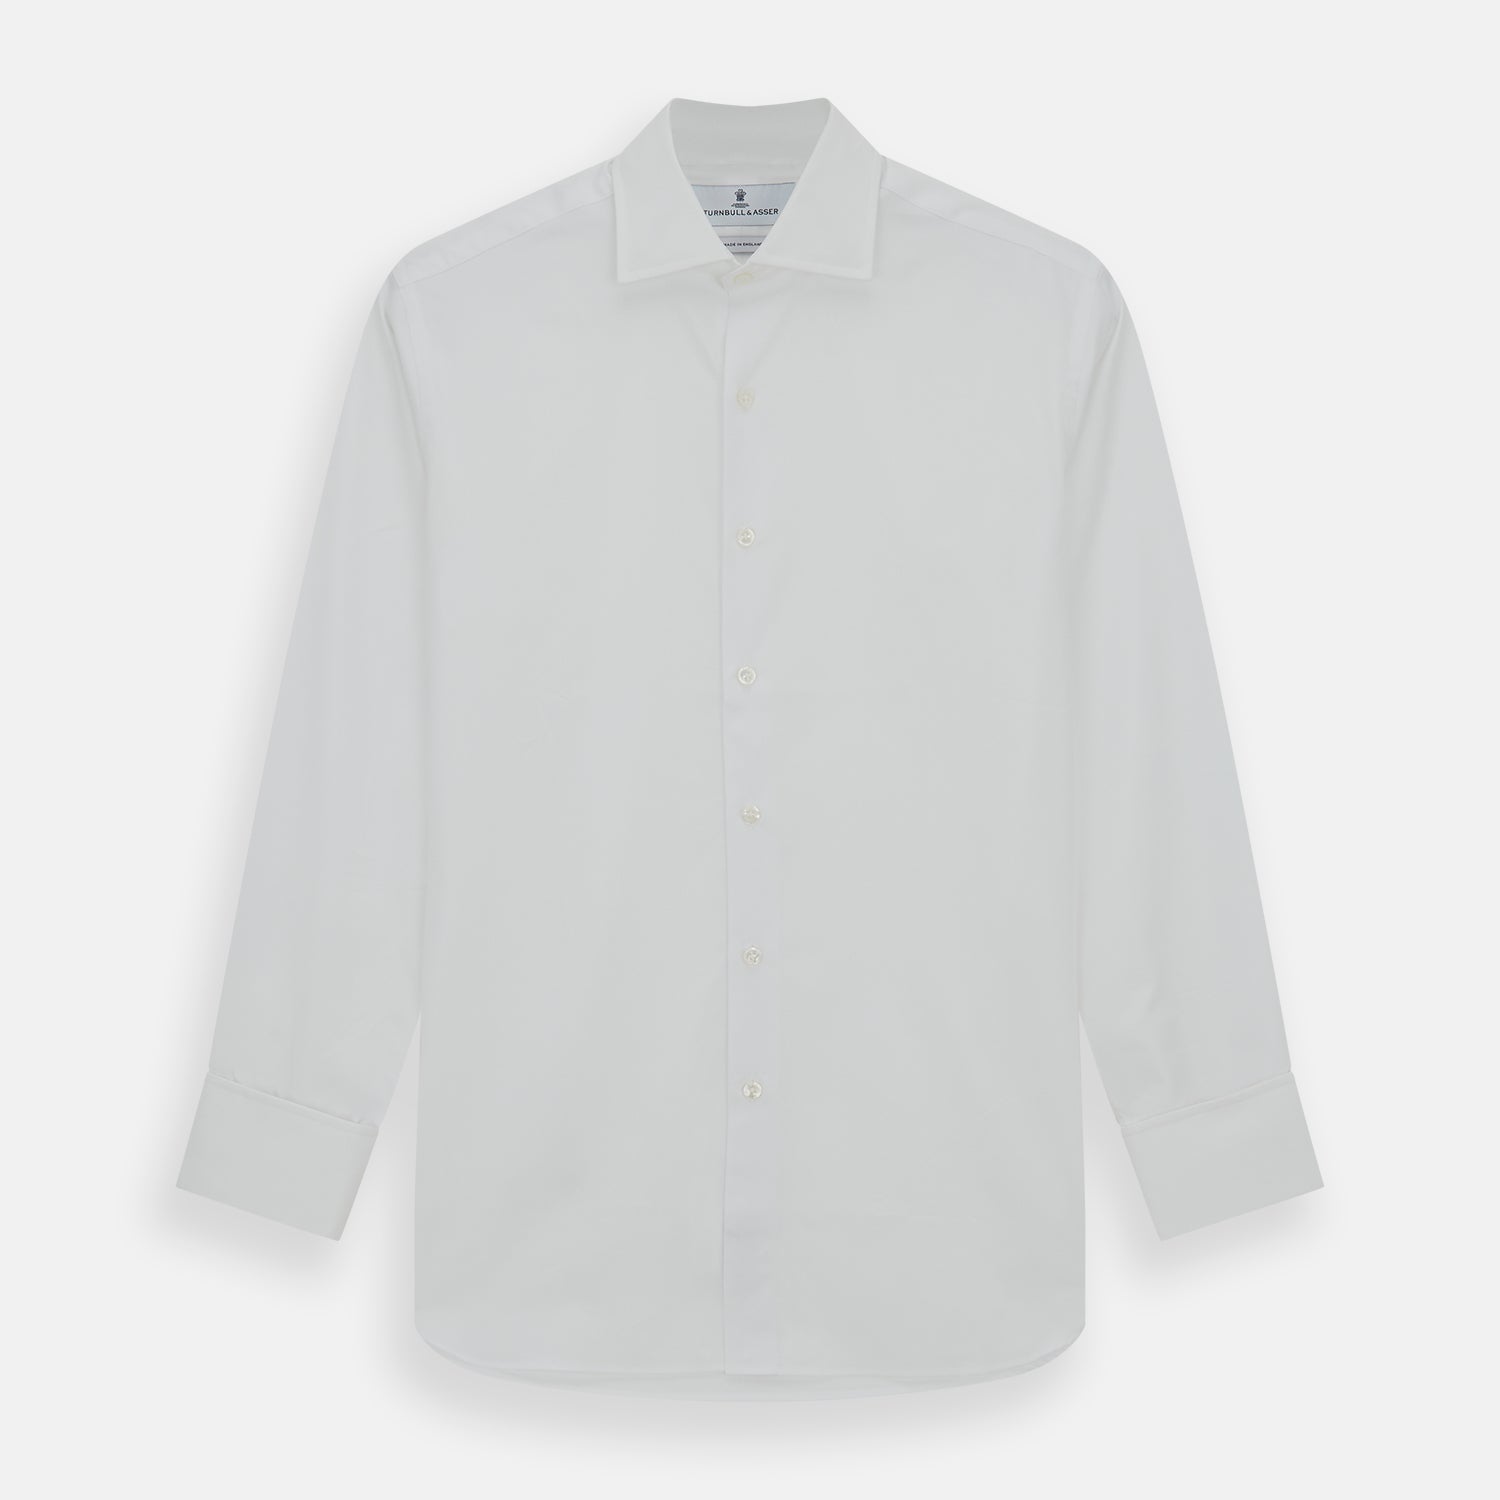 Tailored Fit Plain White Cotton Shirt with Kent Collar and Double Cuffs